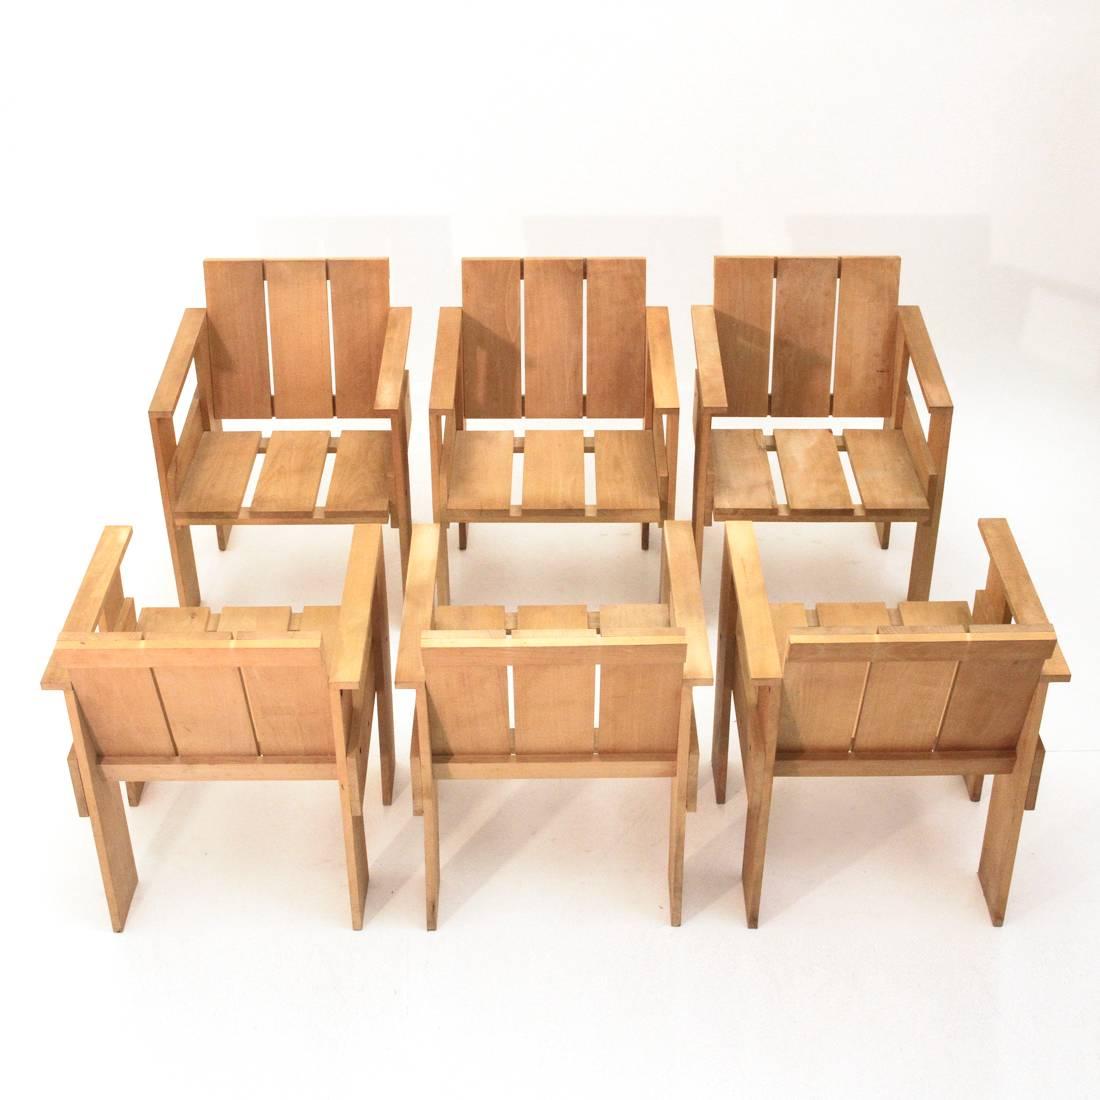 Six chair made in beech frame by Cassina in the 1970s. Designed by Gerrit Rietveld in the 1935.